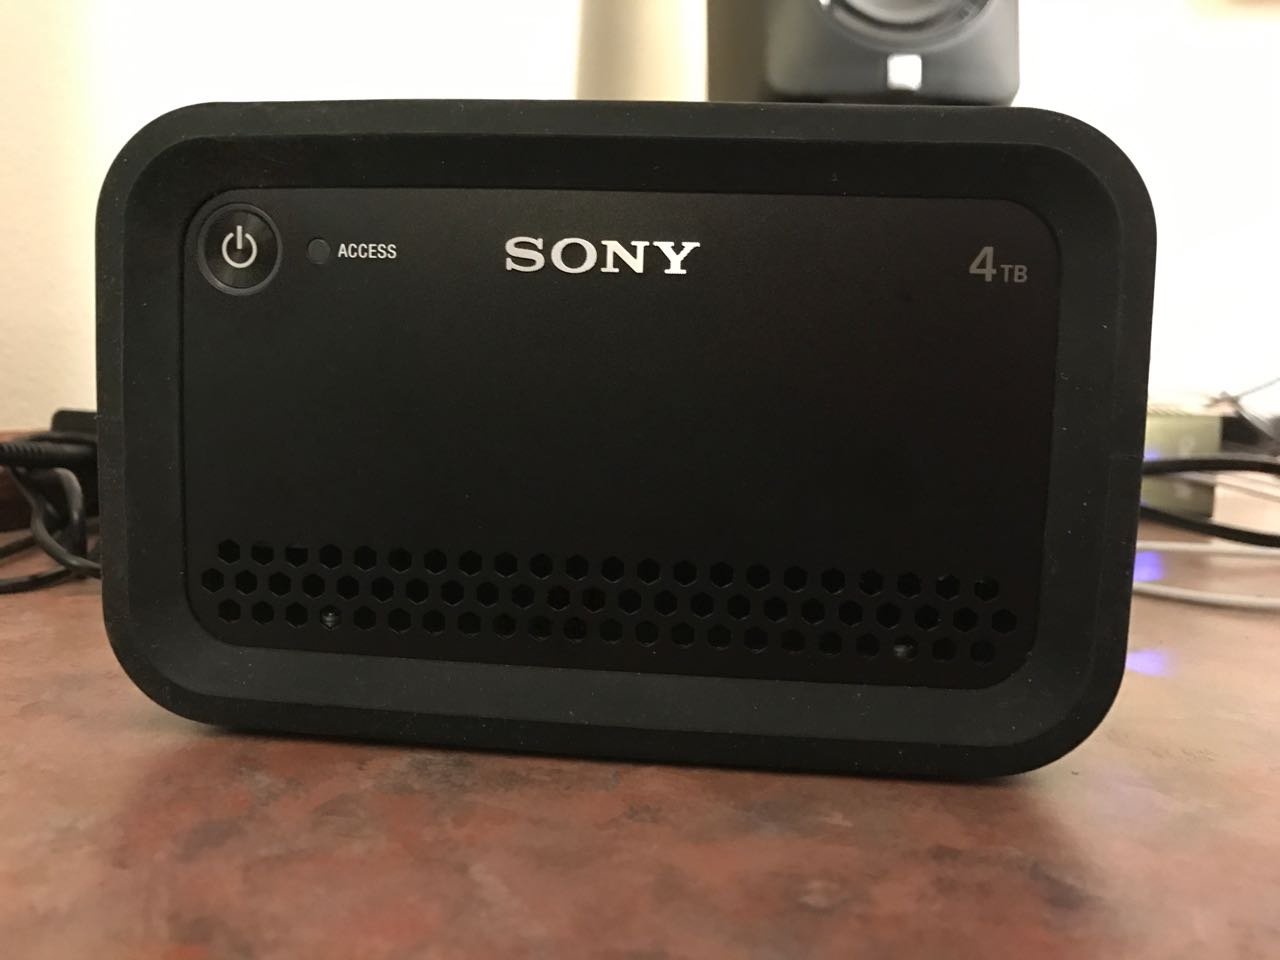 The Sony Rugged RAID sitting, ready to power and serve up media.